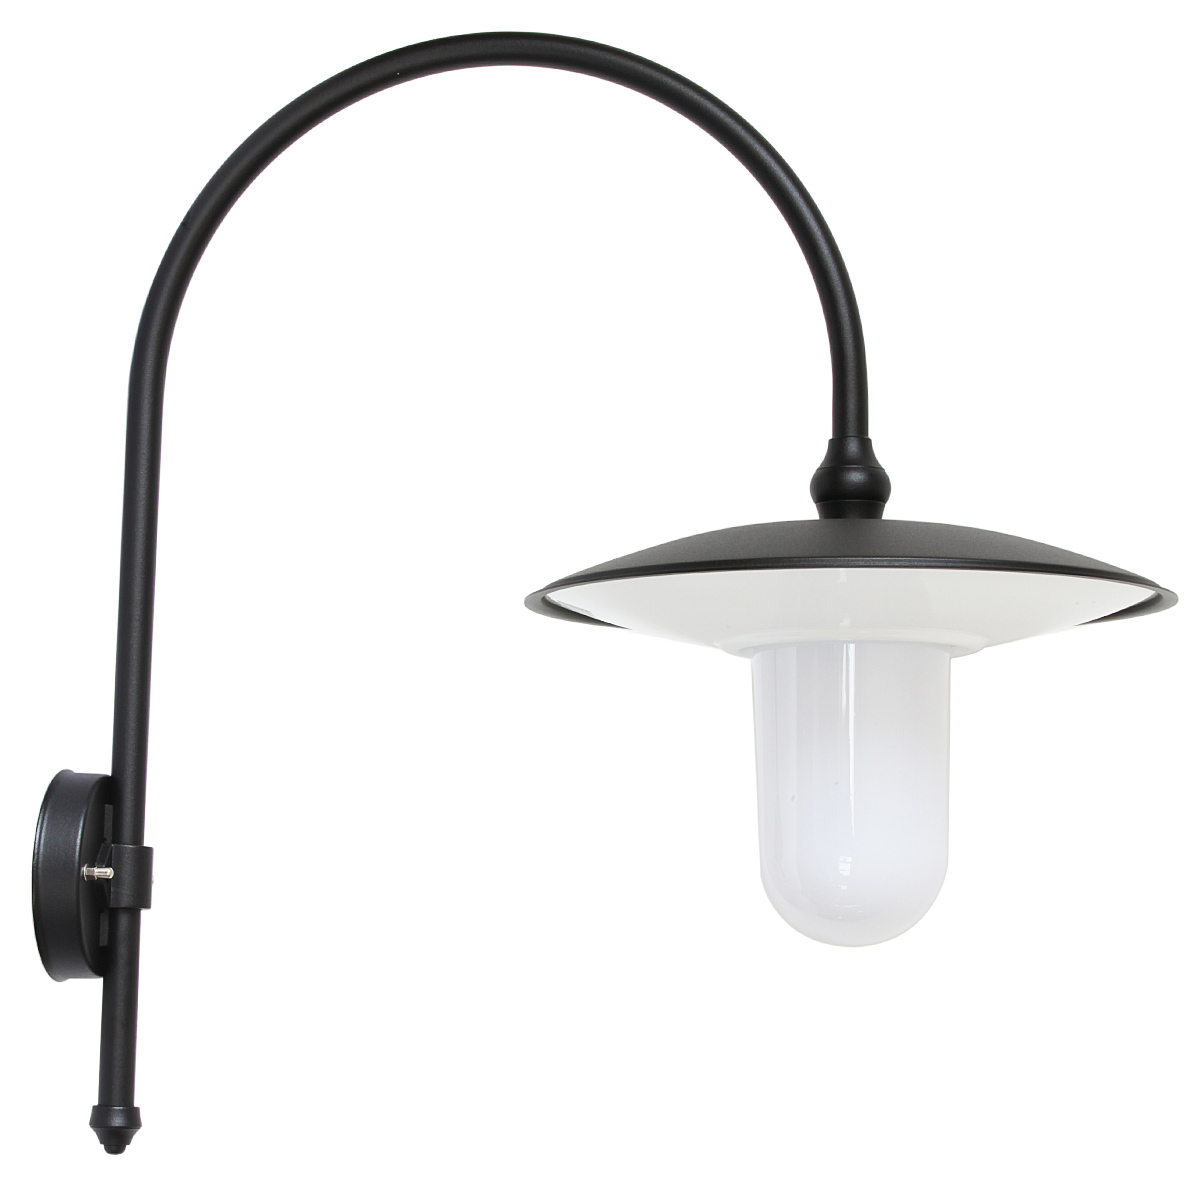 Large Italian Wall Light for Outdoors with Bow-Arm